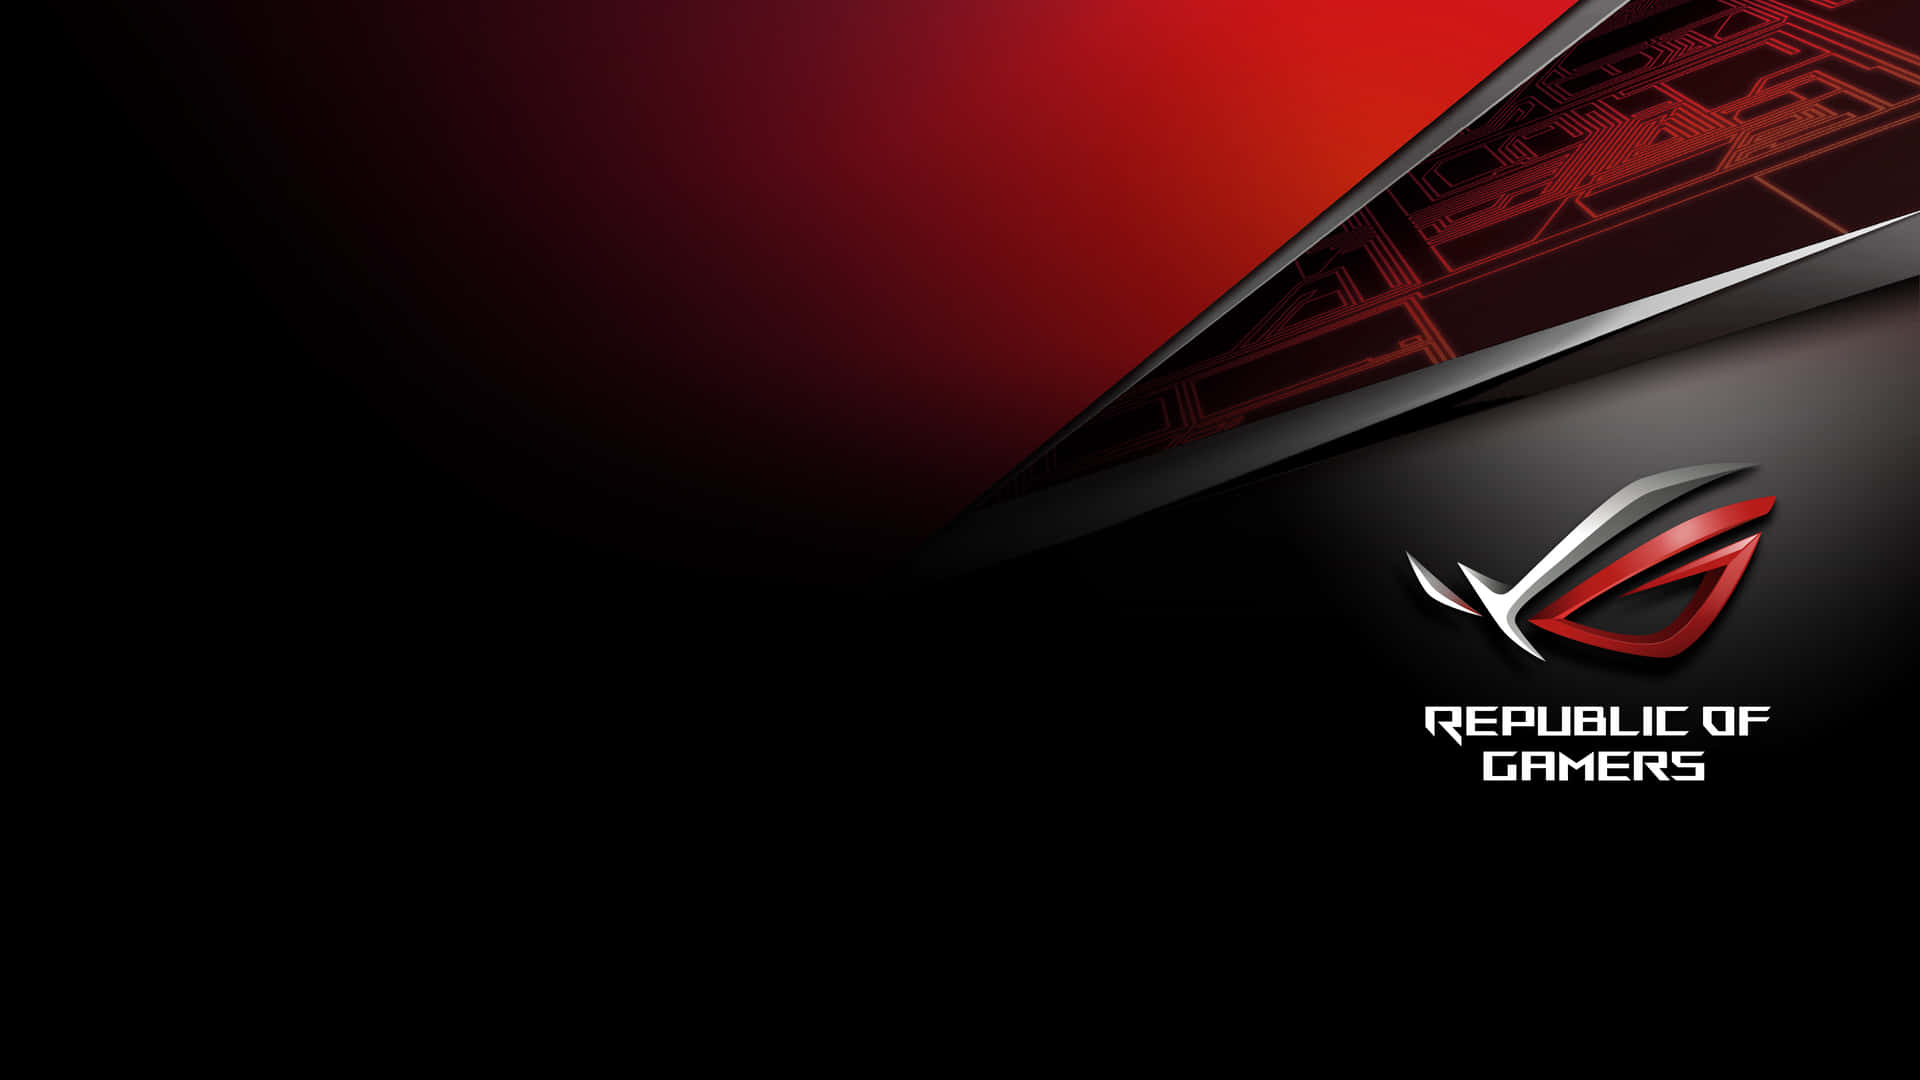 Experience Unrivaled Gaming Performance with ROG